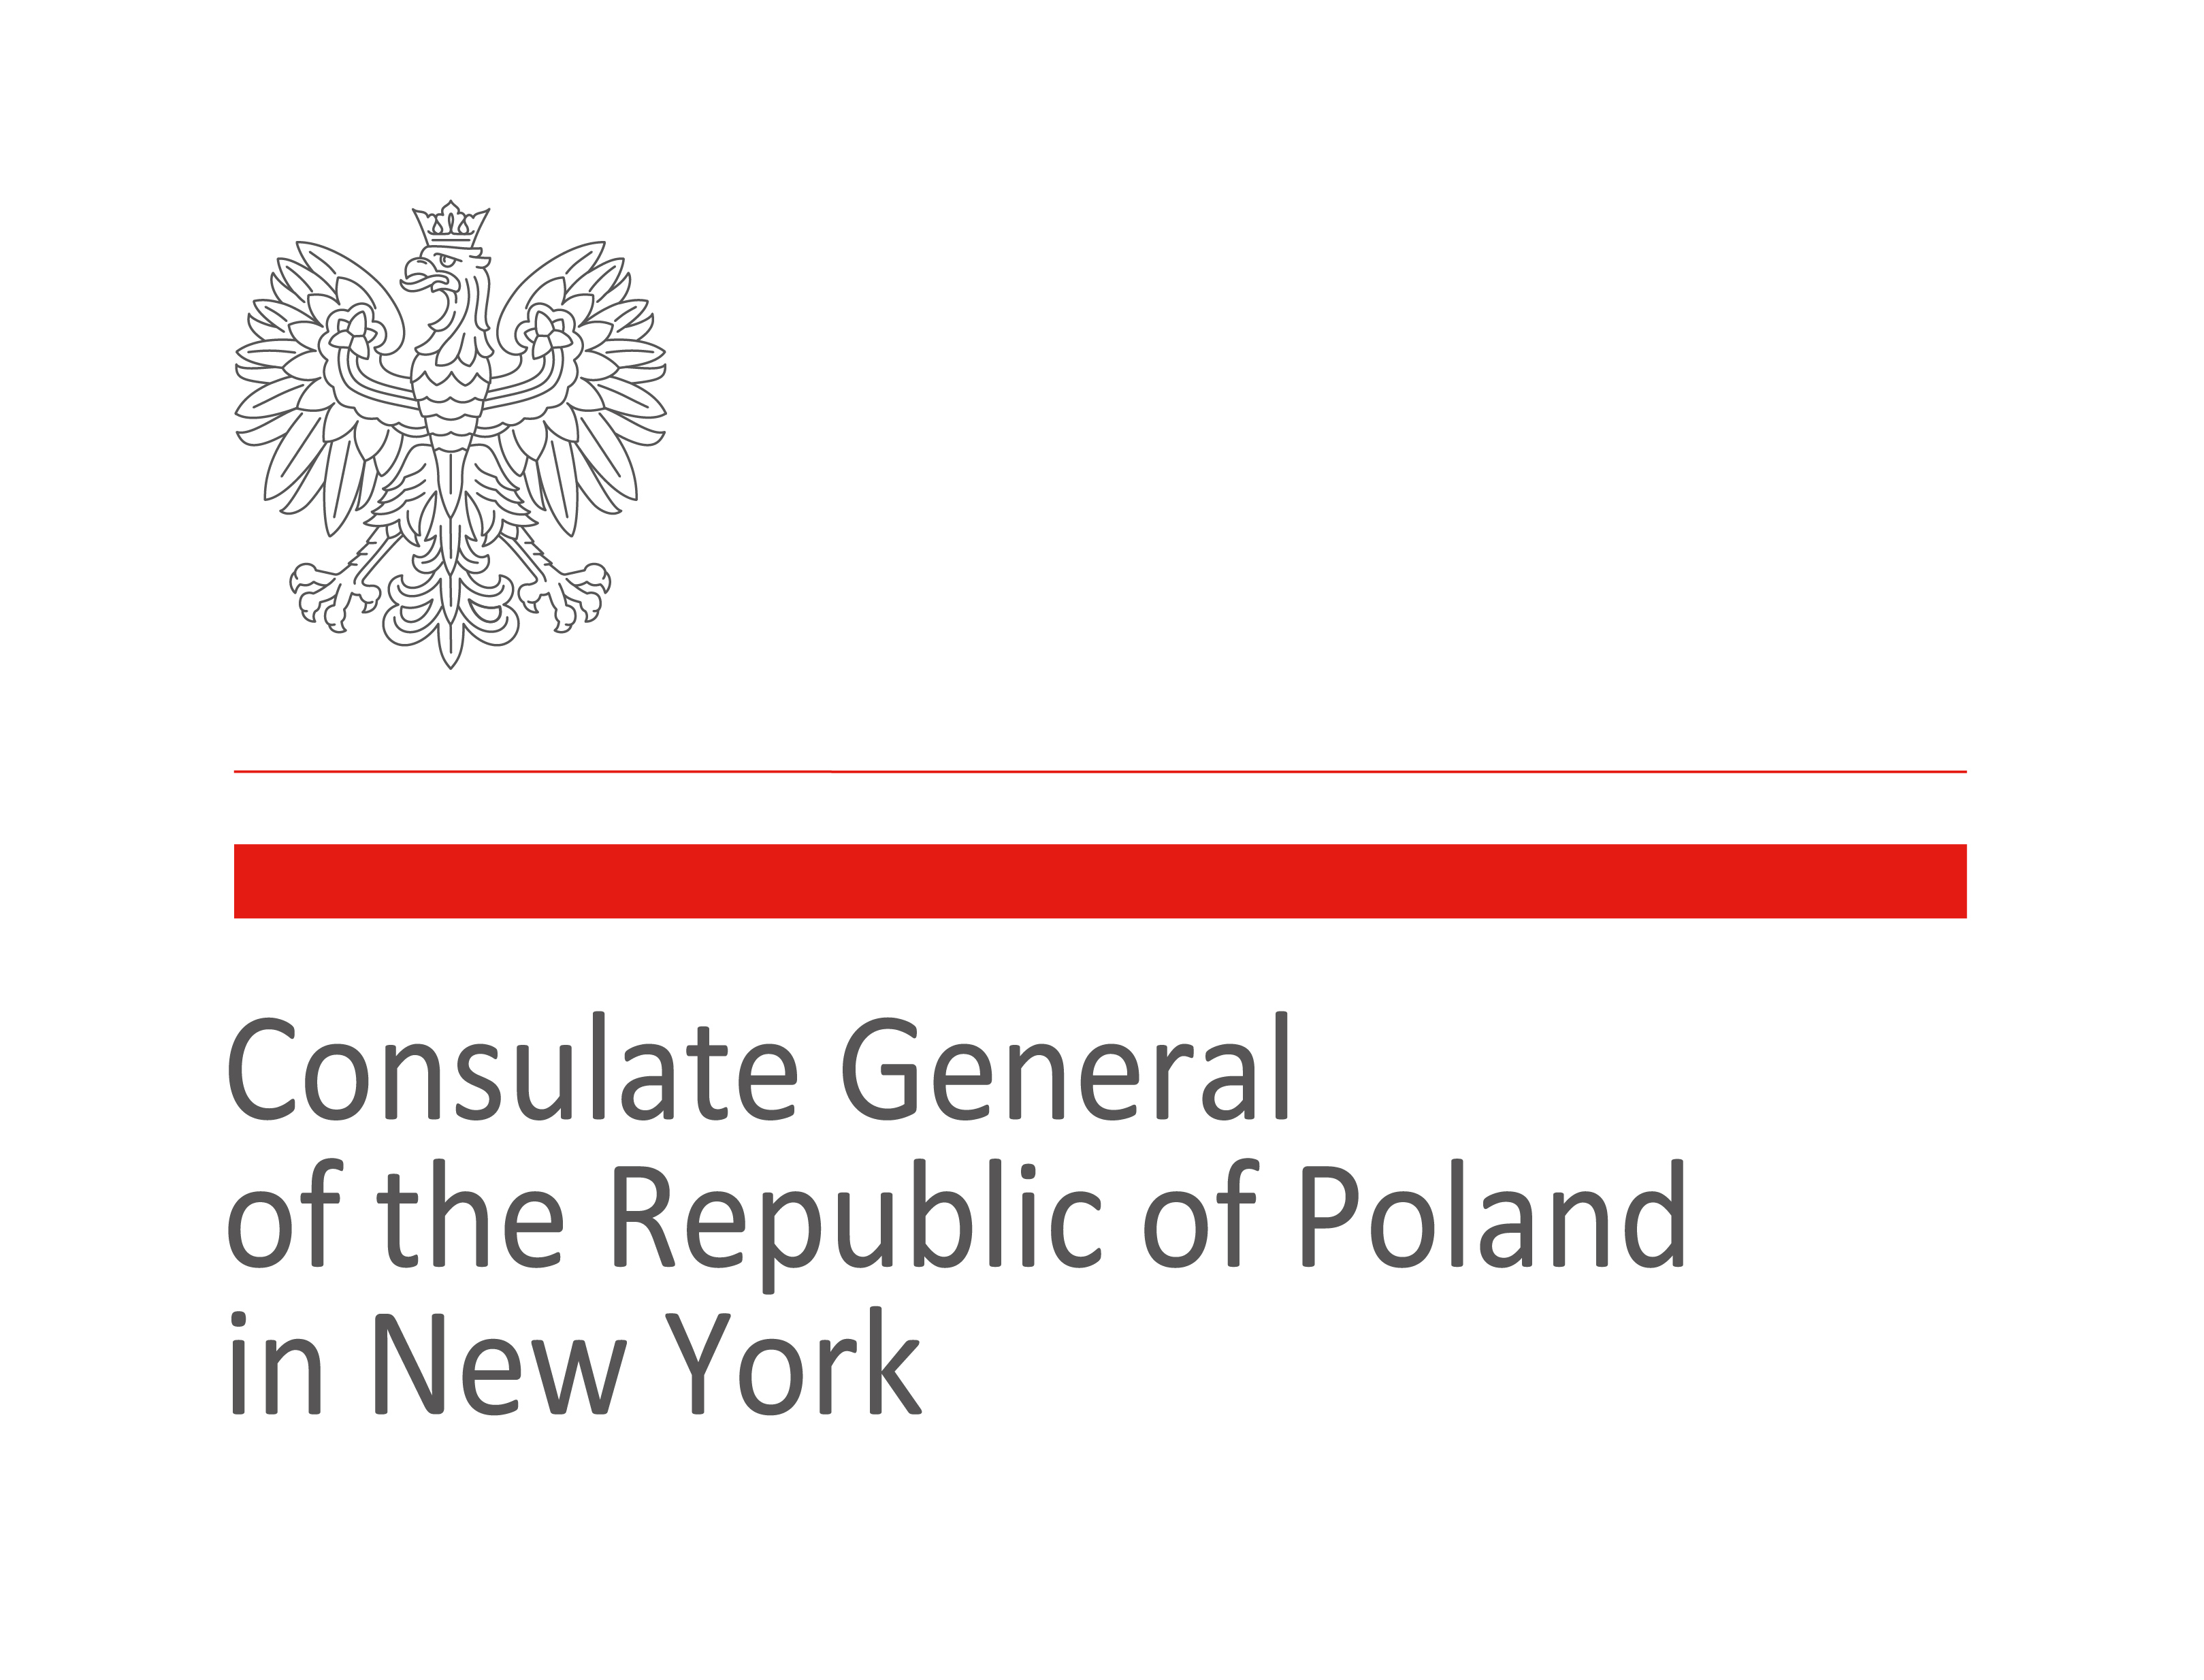 Logo for the Consulate General of the Republic of Poland in New York.